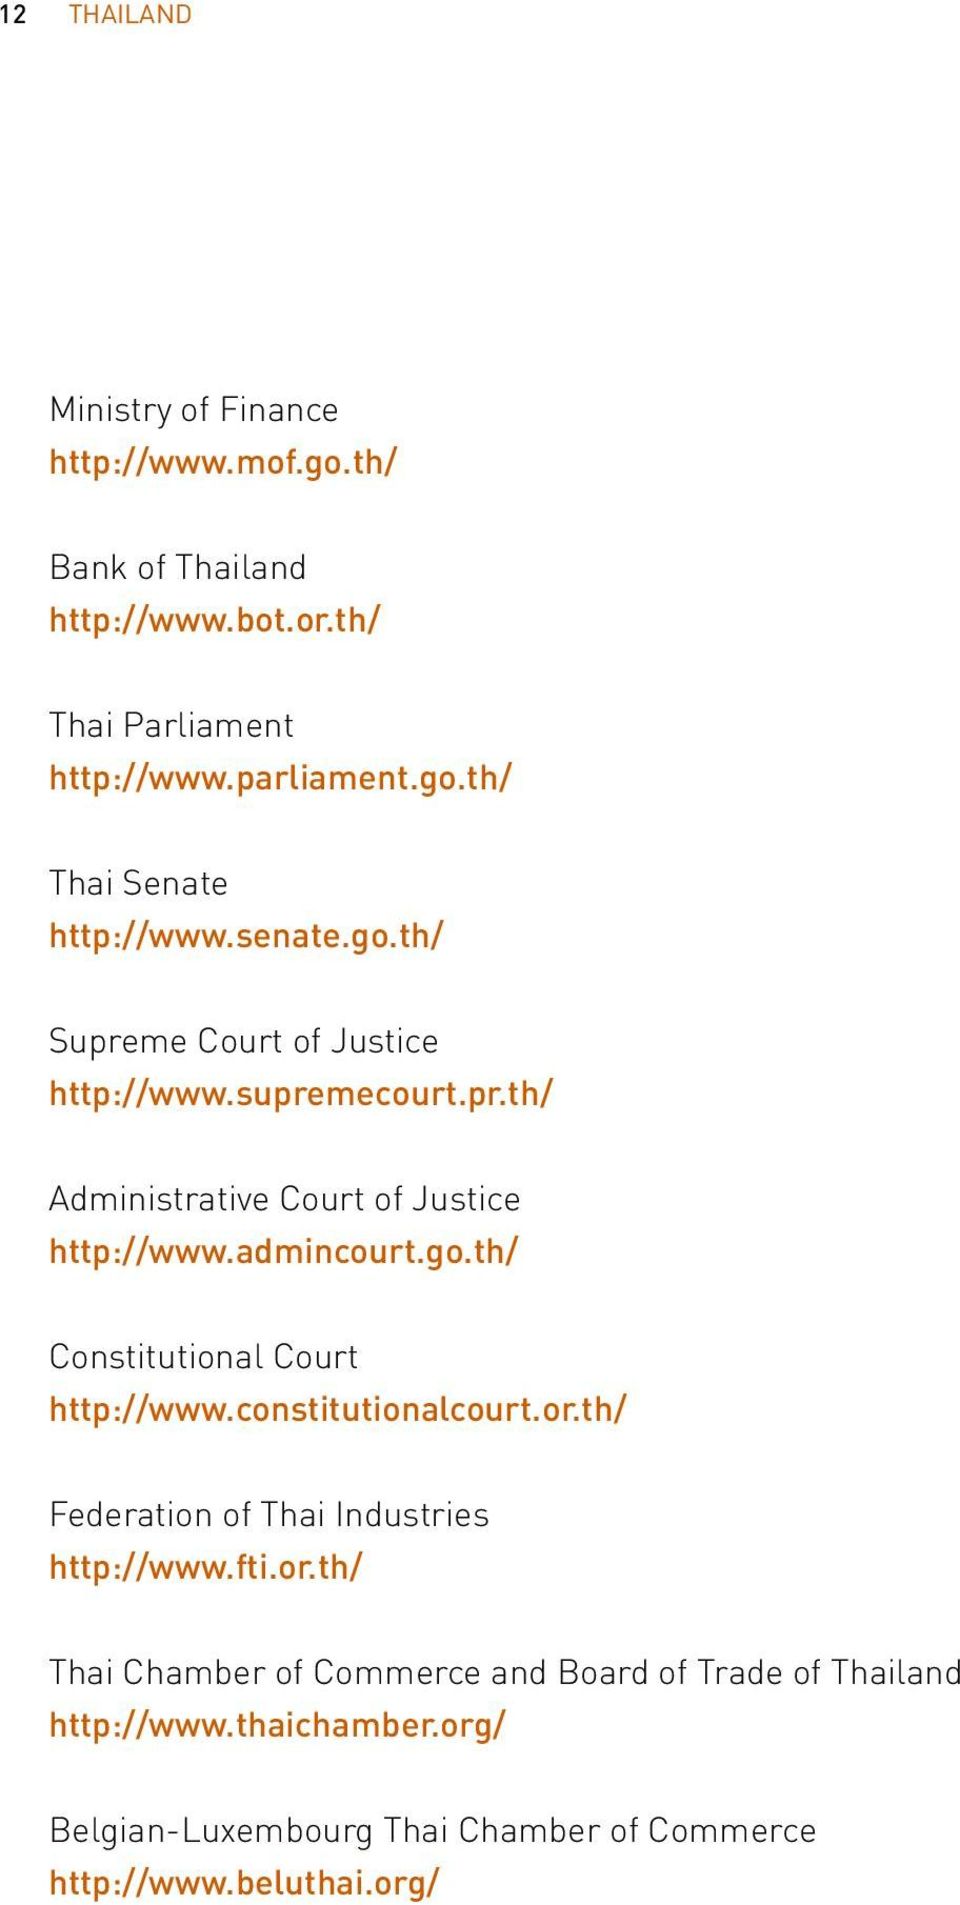 constitutionalcourt.or.th/ Federation of Thai Industries http://www.fti.or.th/ Thai Chamber of Commerce and Board of Trade of Thailand http://www.